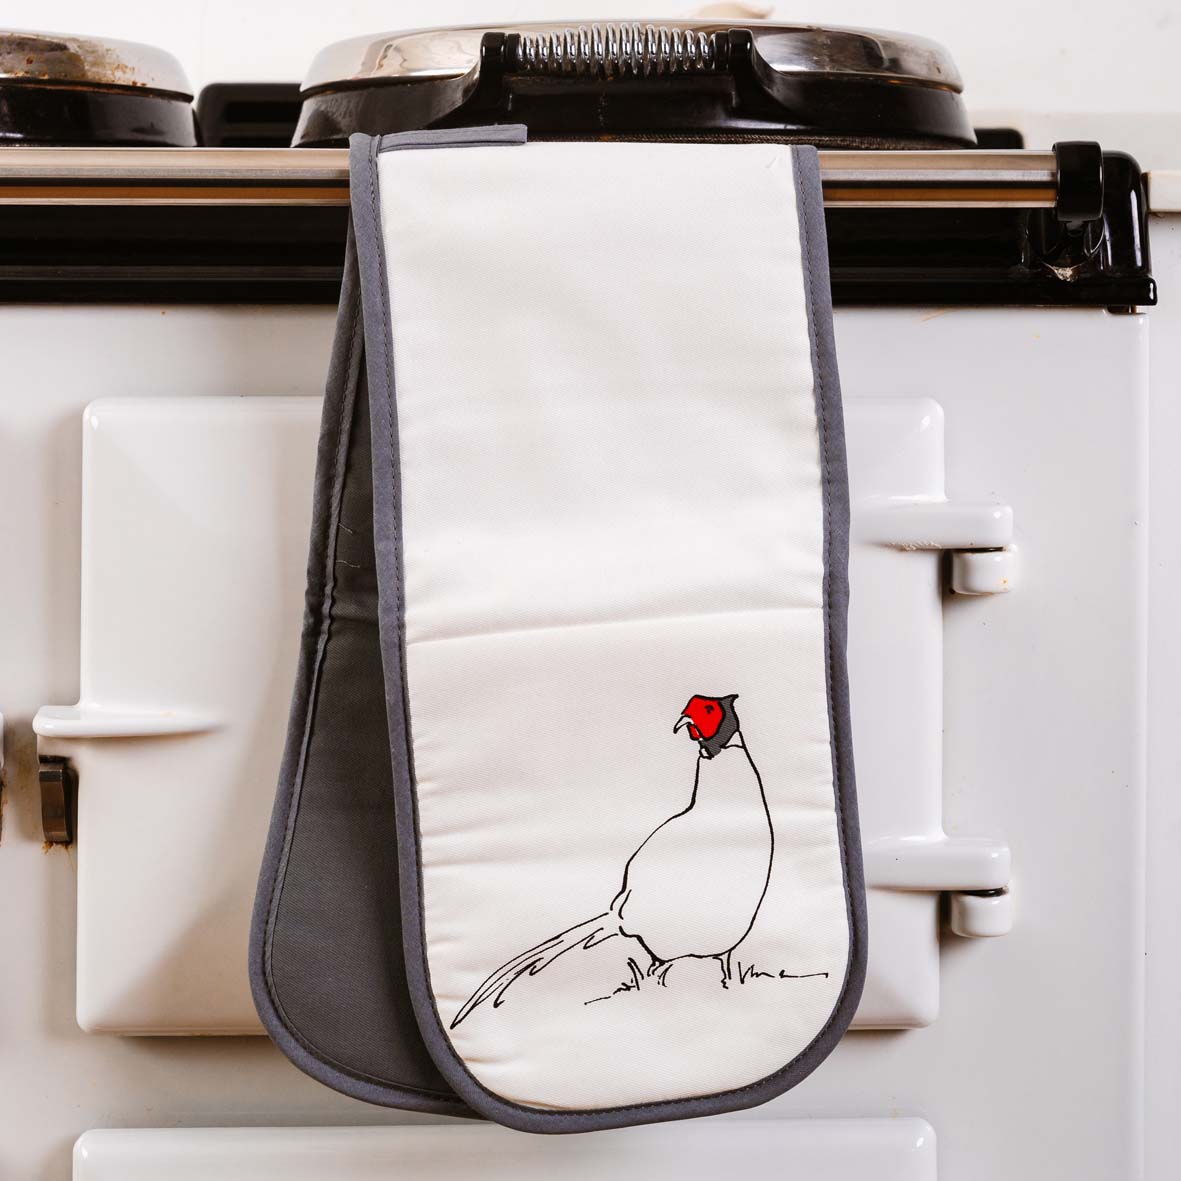 Pheasant Oven Gloves SALE